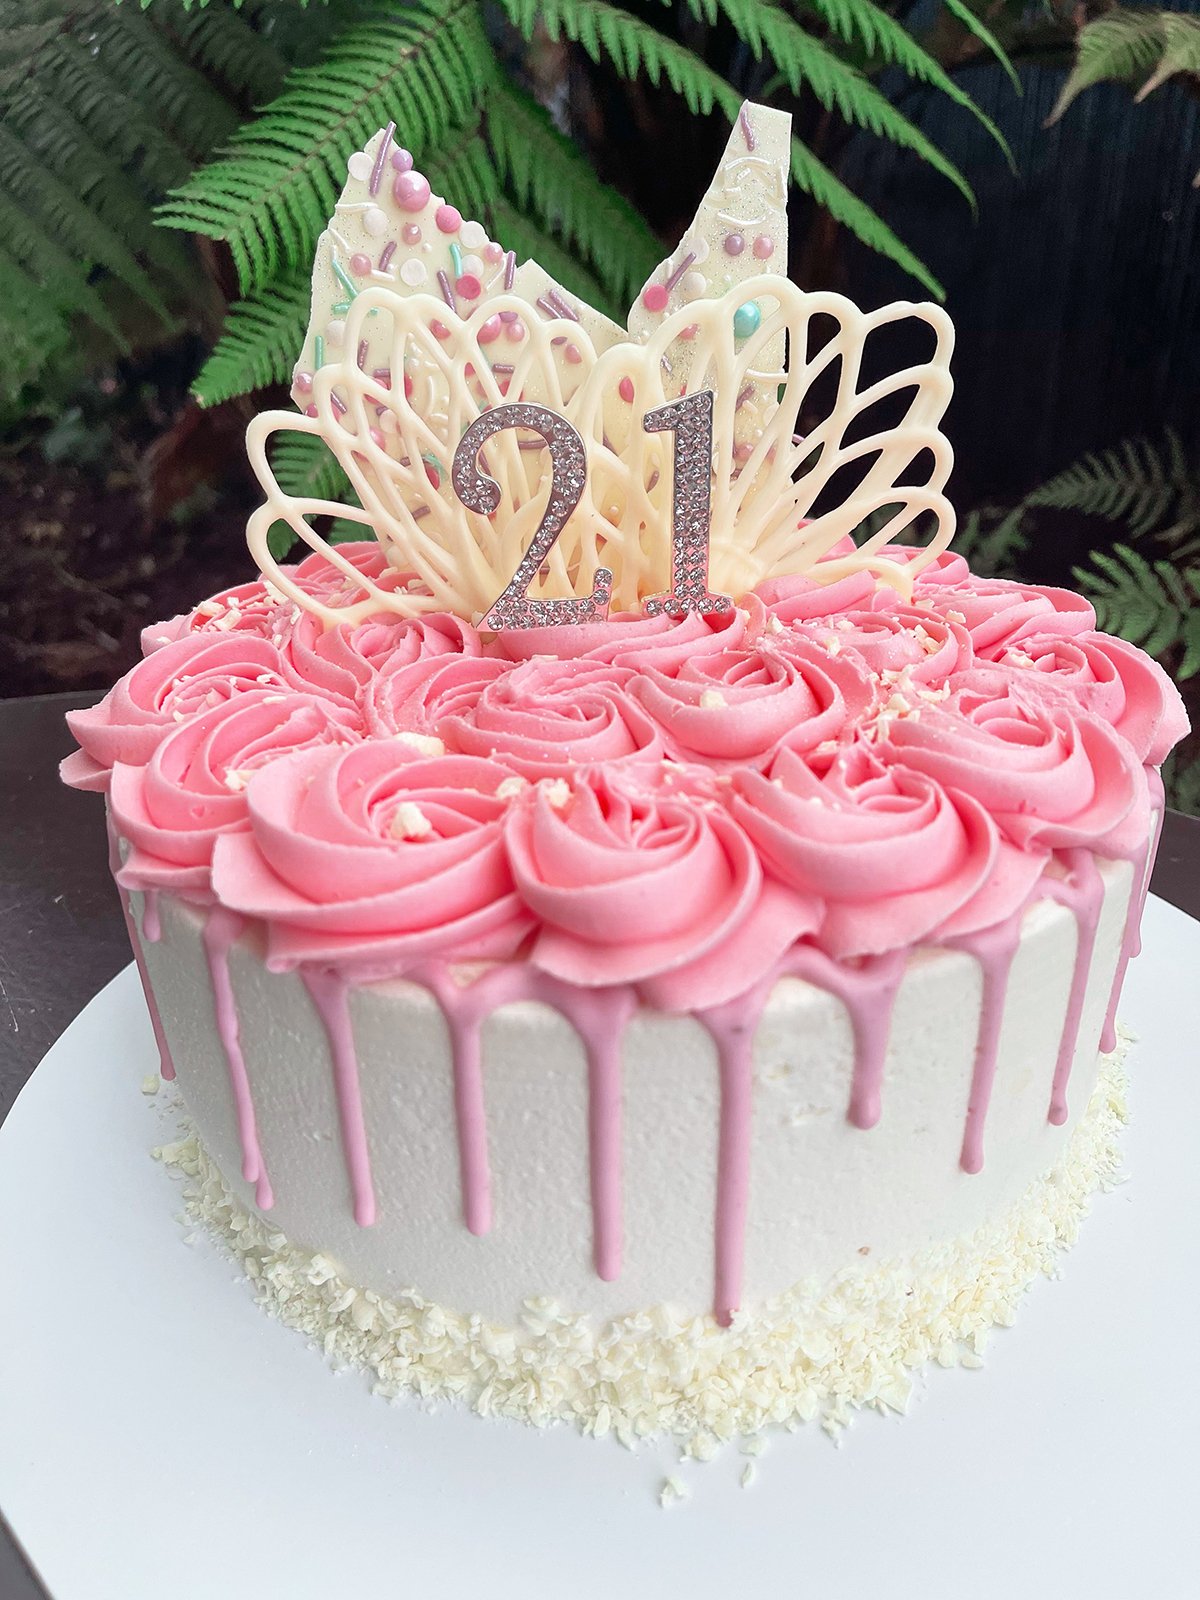 Discover more than 69 pink christening cake - awesomeenglish.edu.vn